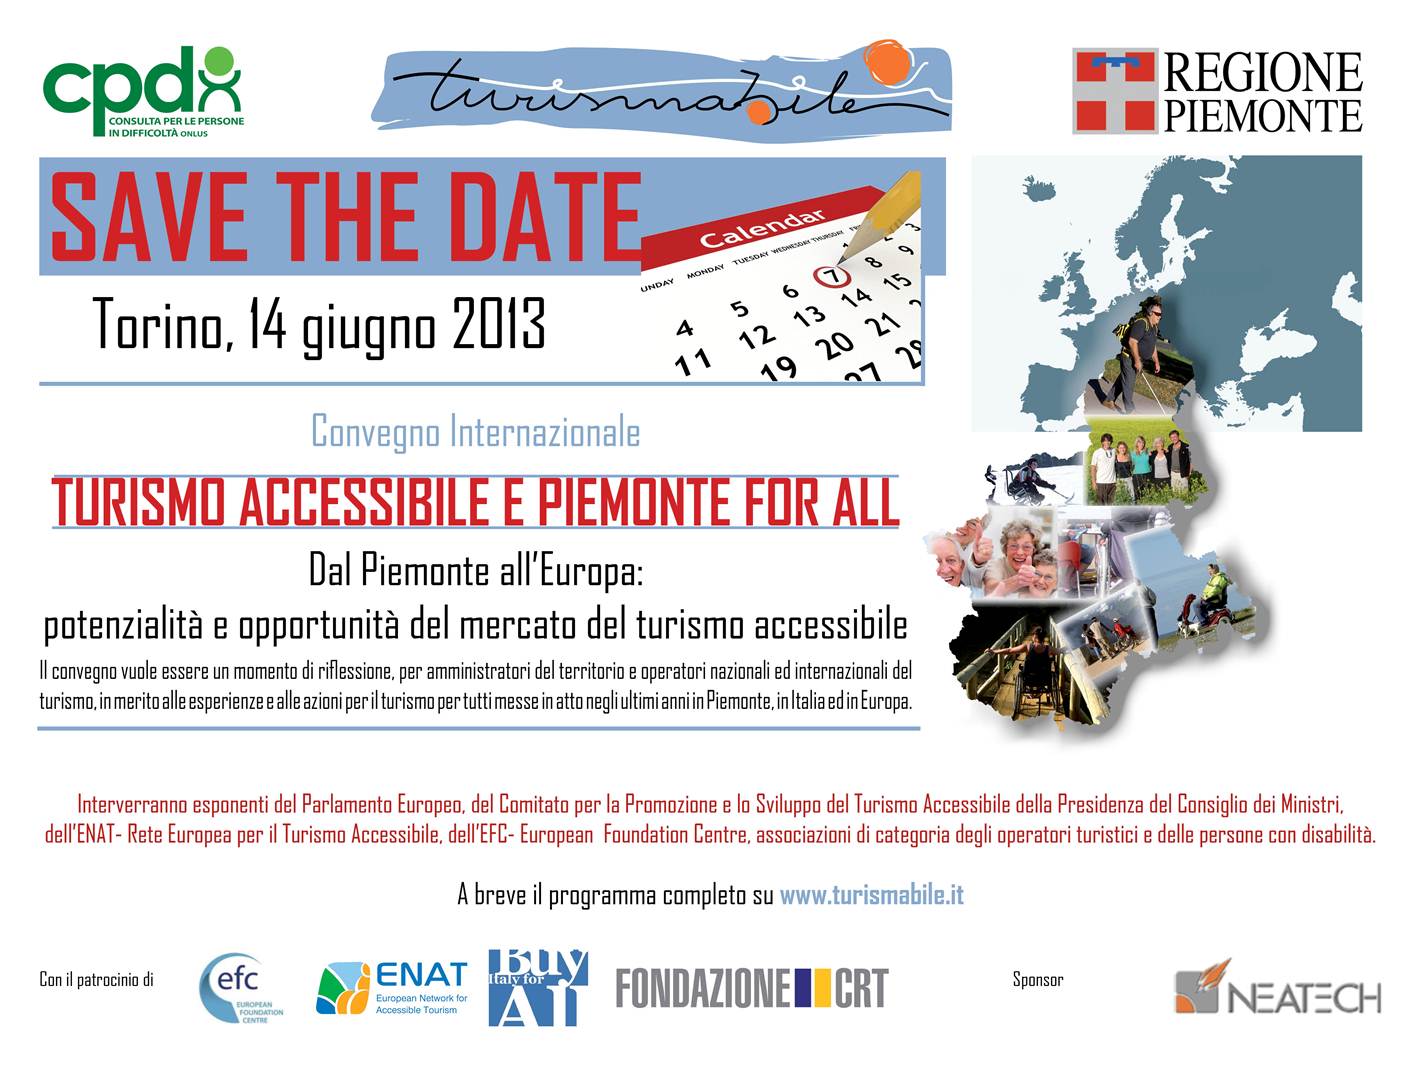 Image Turismabile conference save the date 14.6.2013 banner